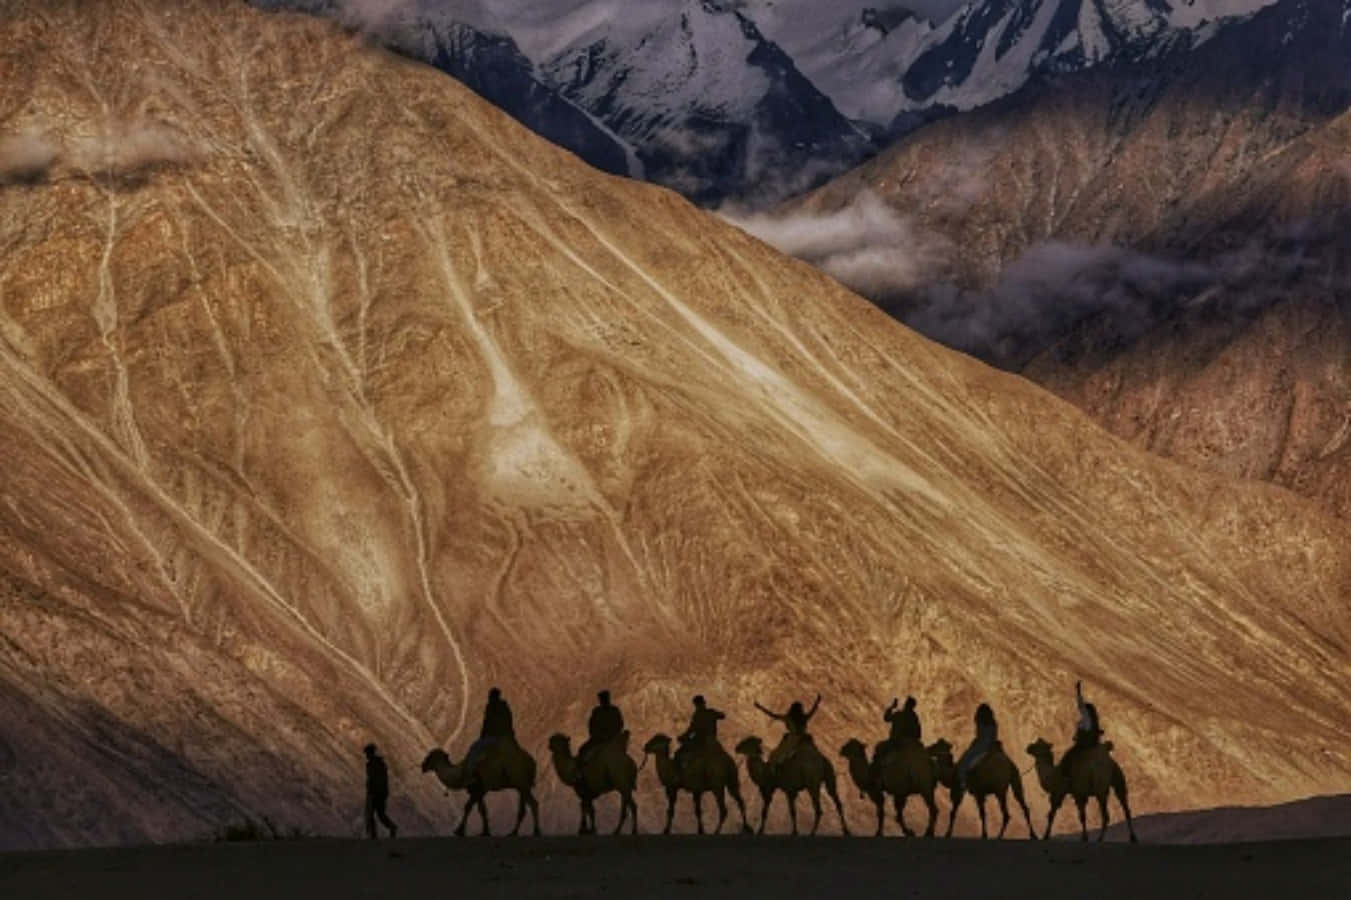 a group of people riding camels in the mountains